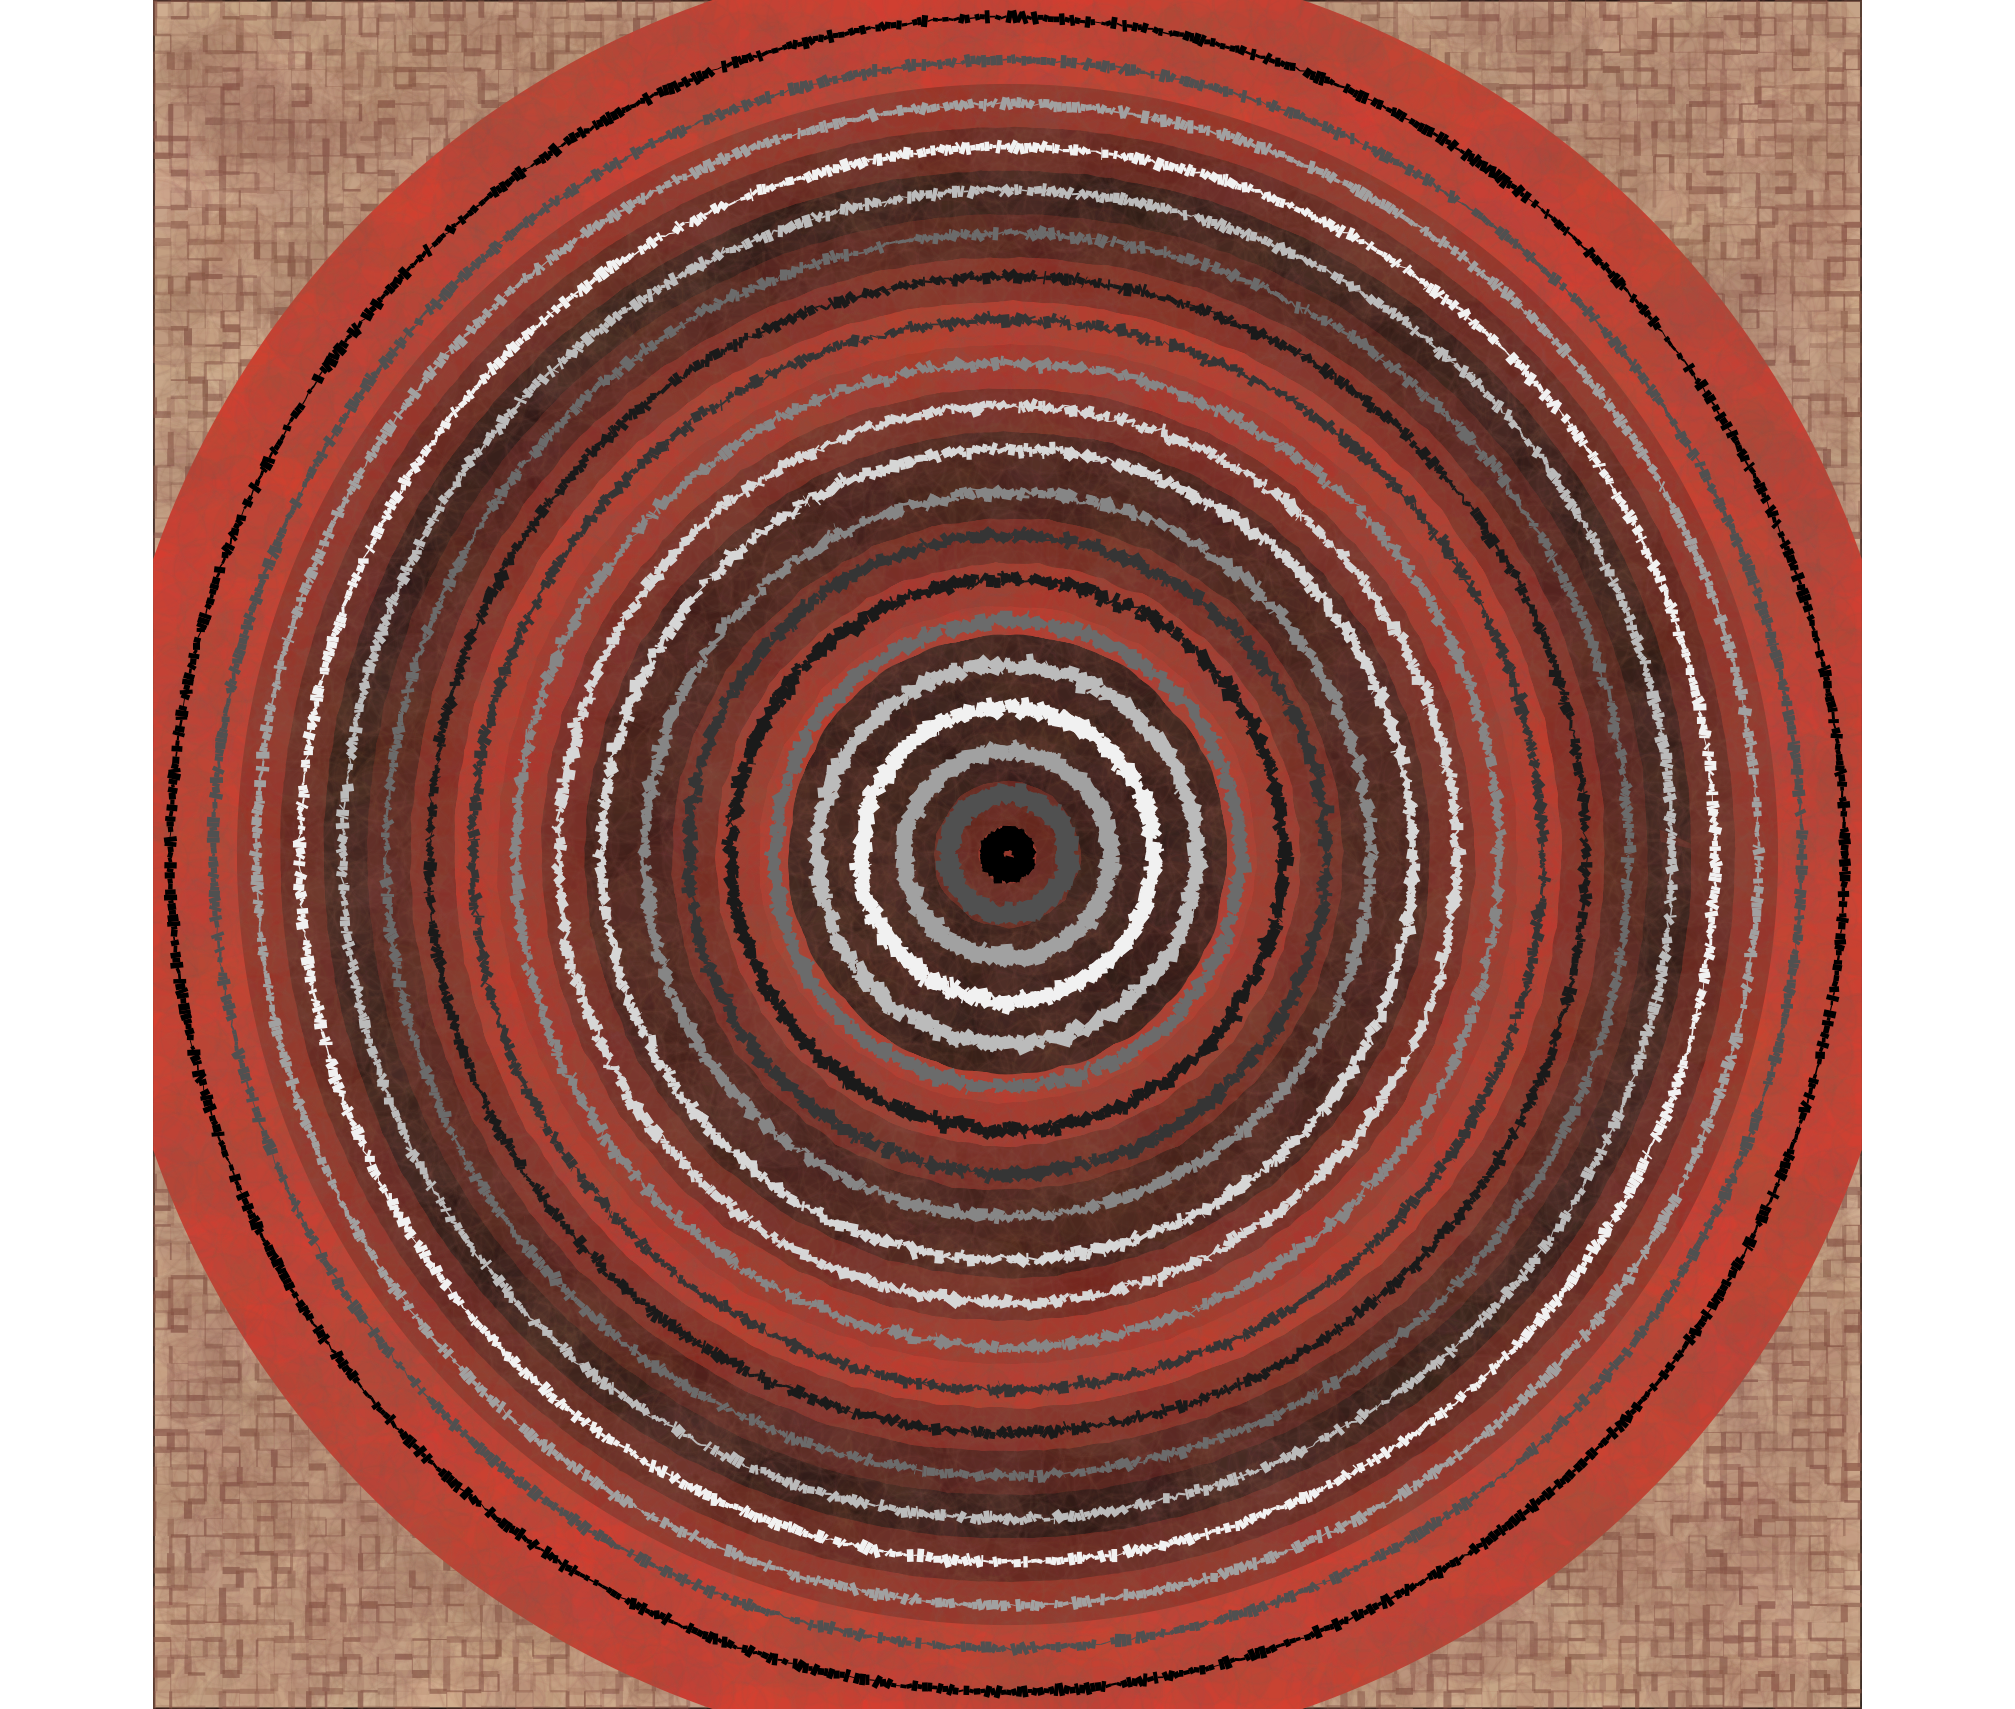 A mostly red circle with different layers of black and white indescribable text on a beige background with a faded grid texture